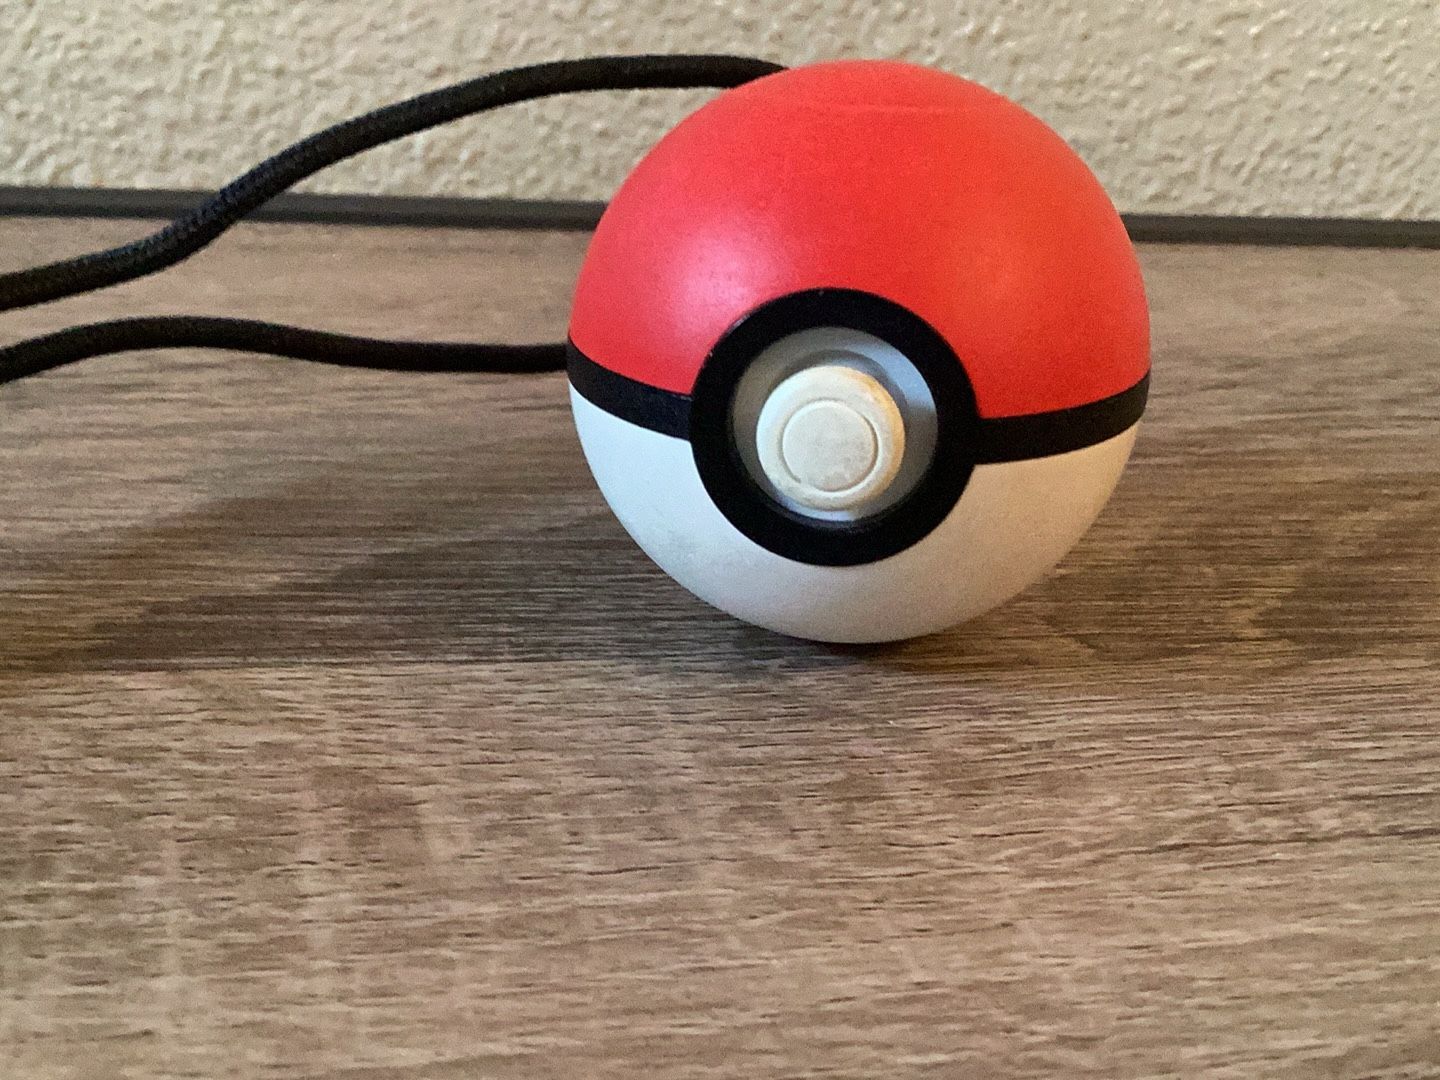 Pokeball Plus- Great Condition.  These Retail For $196 When New.  Pickup Only